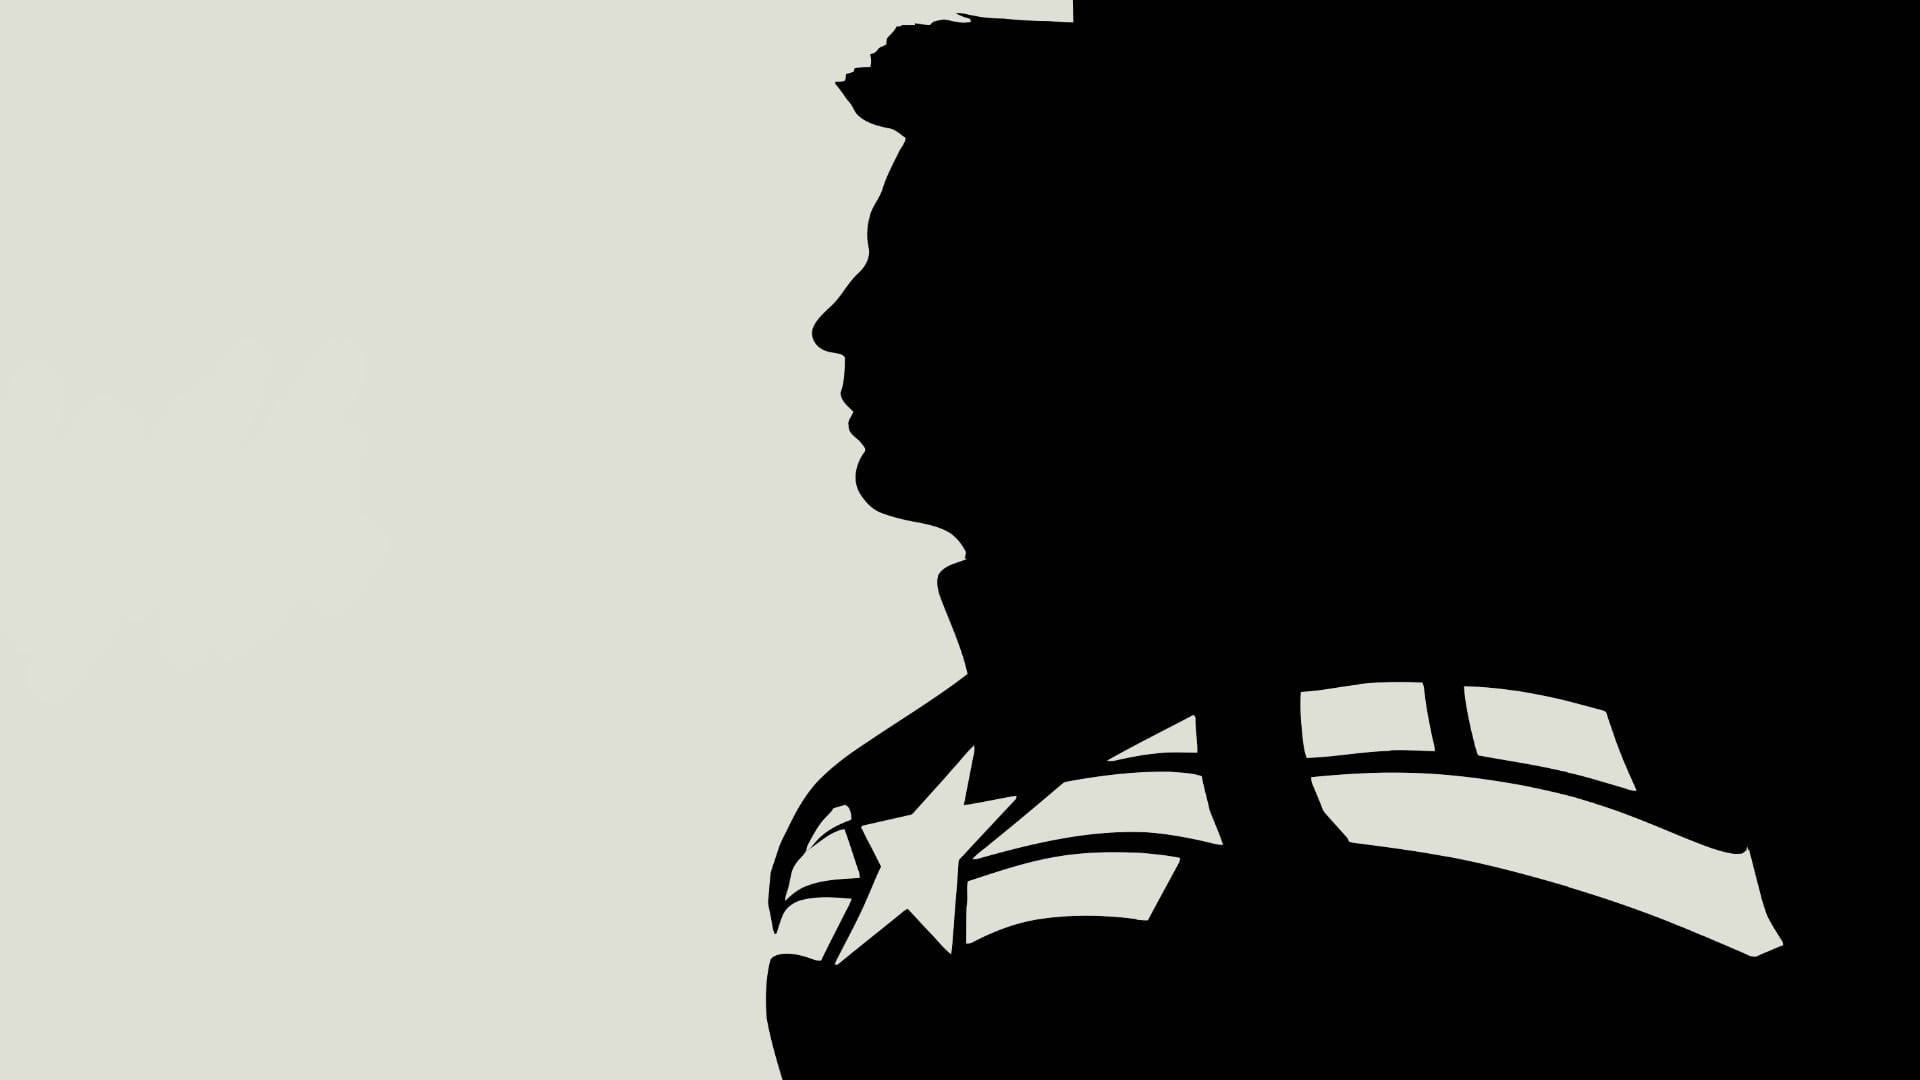 "The legendary Captain America, ready to defend justice again" Wallpaper